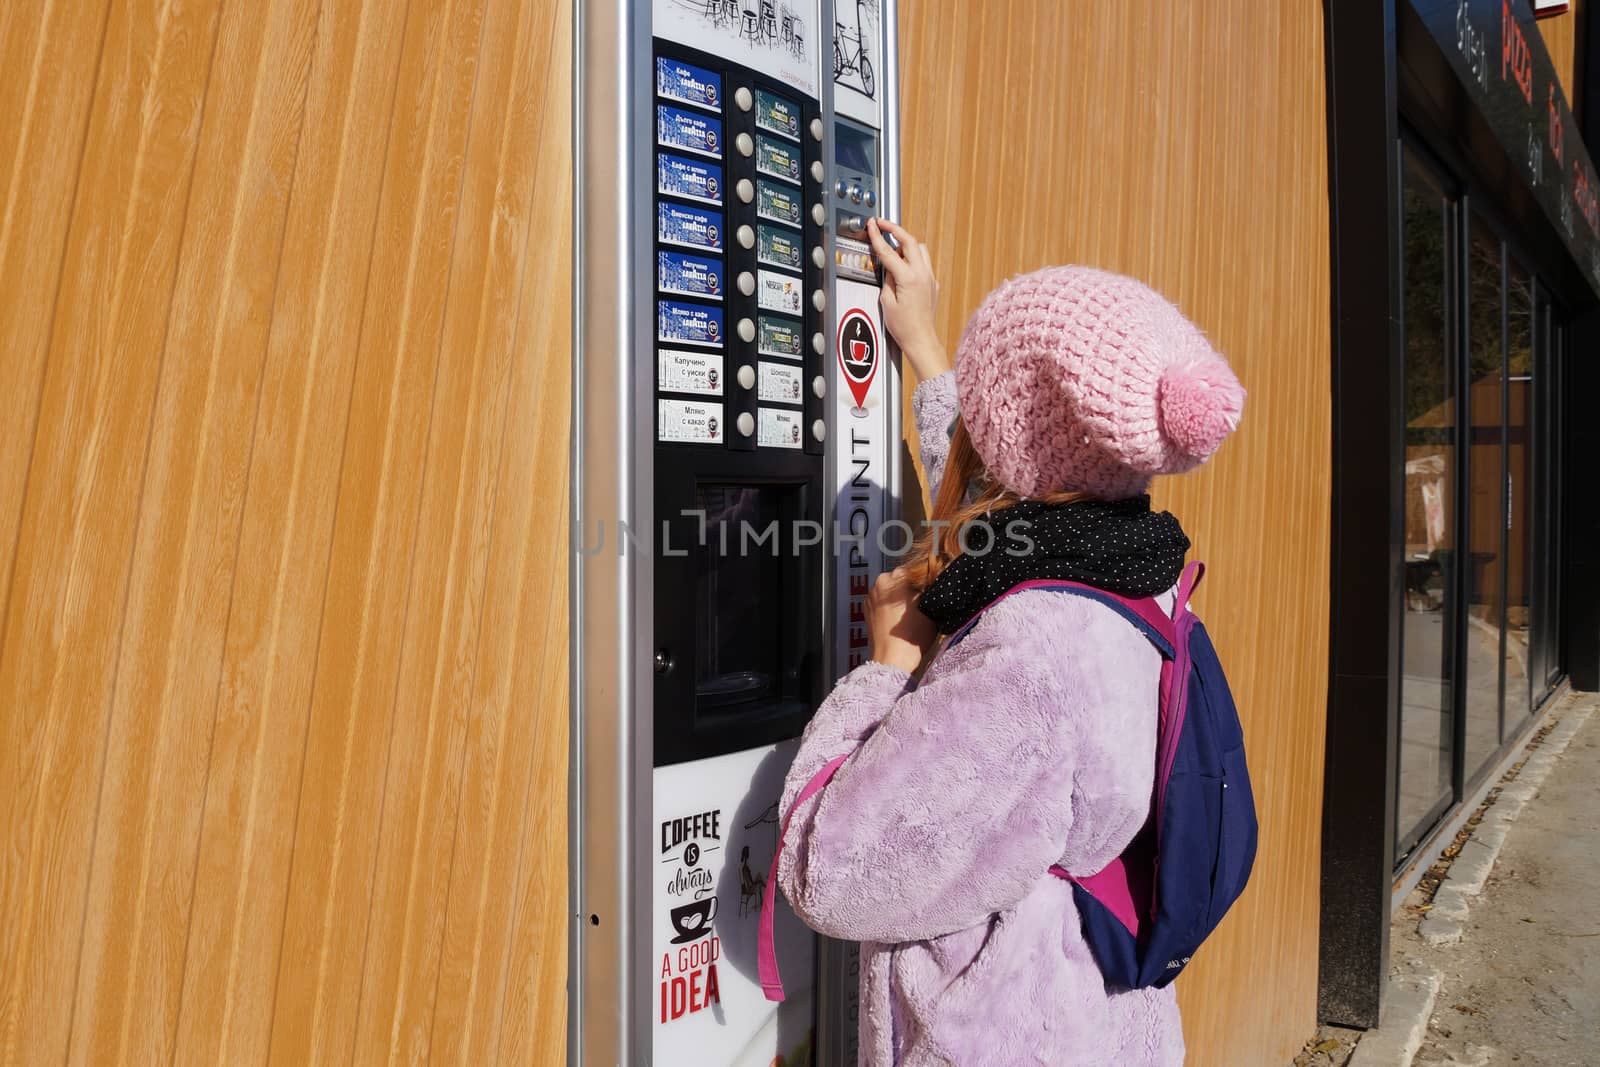 Varna, Bulgaria - November, 26, 2020: teen girl in a medical mask buys a drink from a vending machine on the street